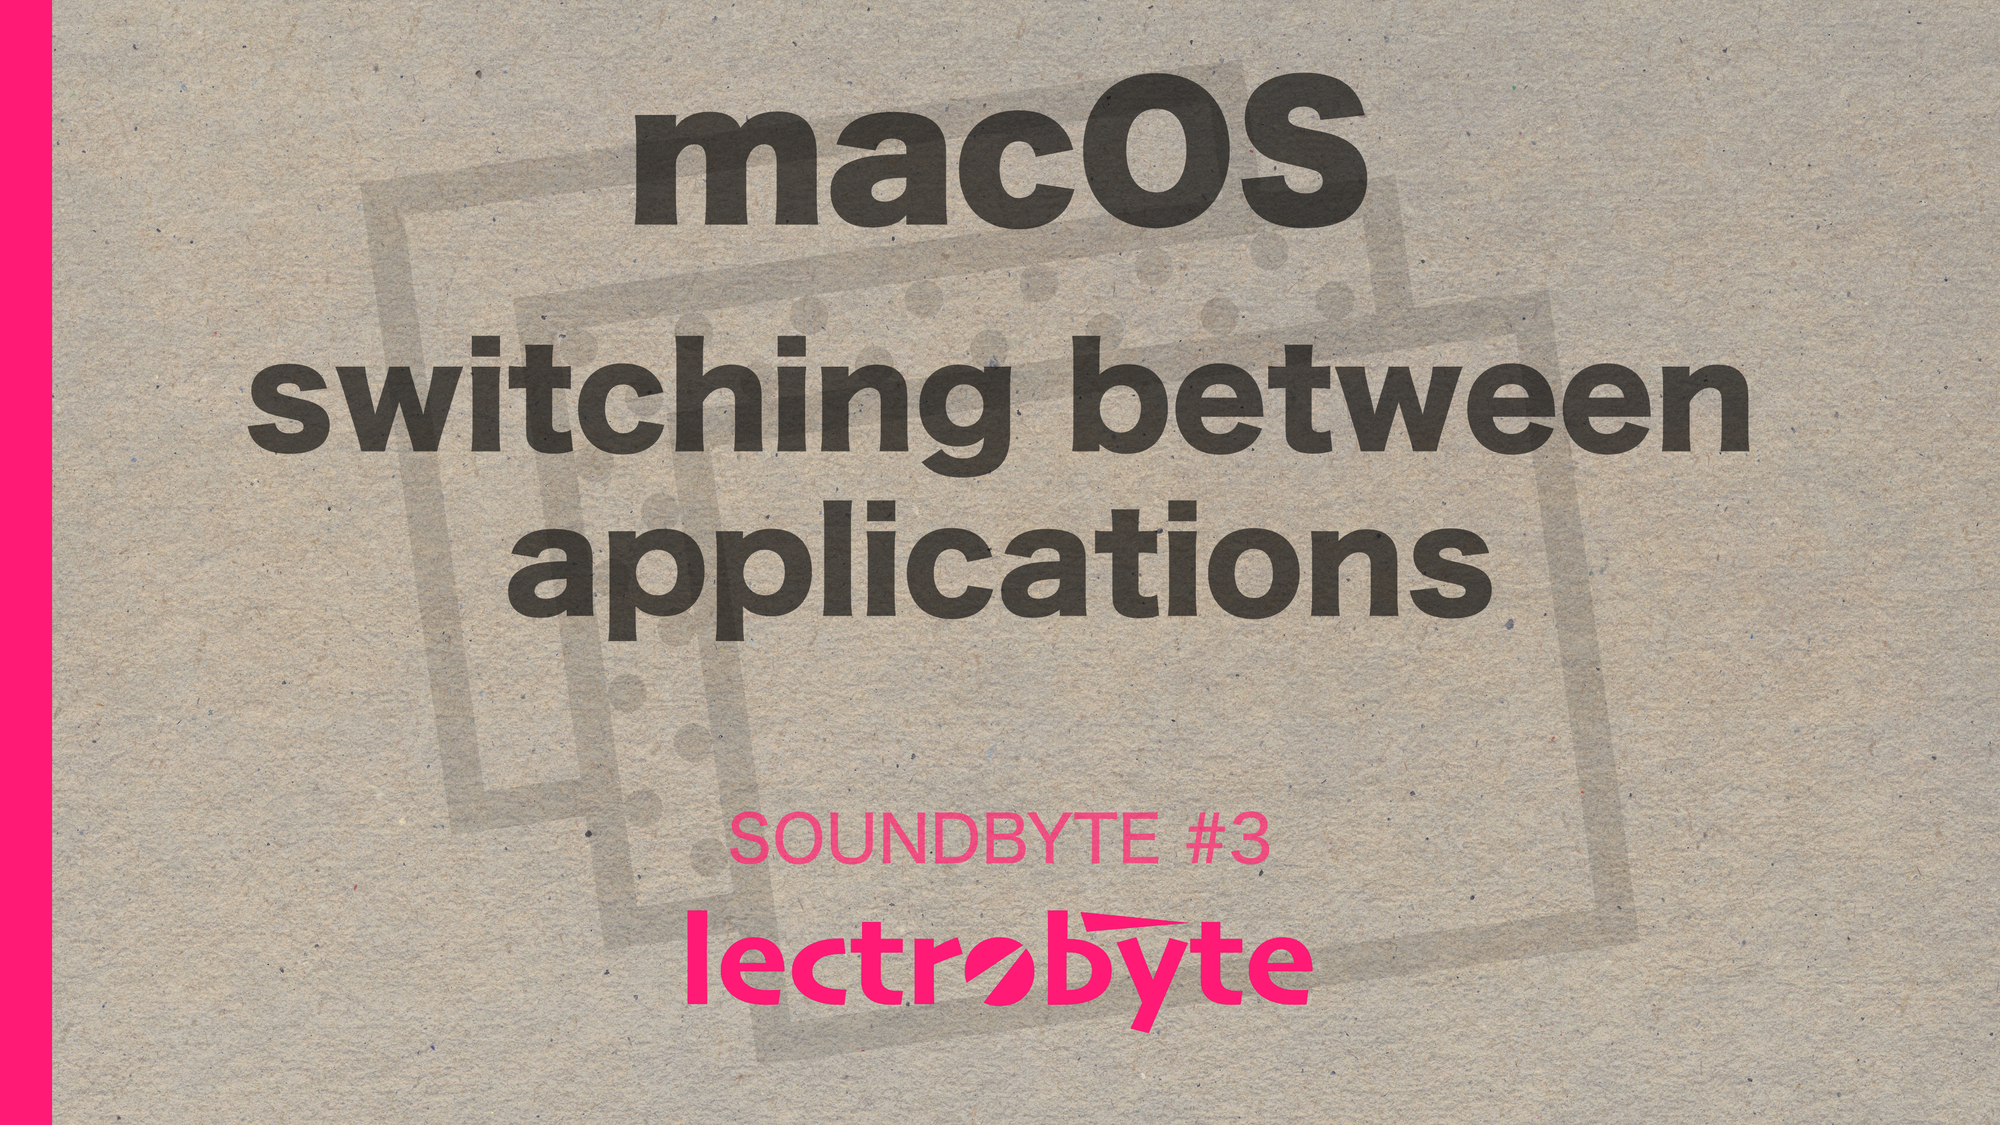 SOUNDBYTE #3 macOS Switching Between Applications artwork. Icon by Ben Davis @ The Noun Project.